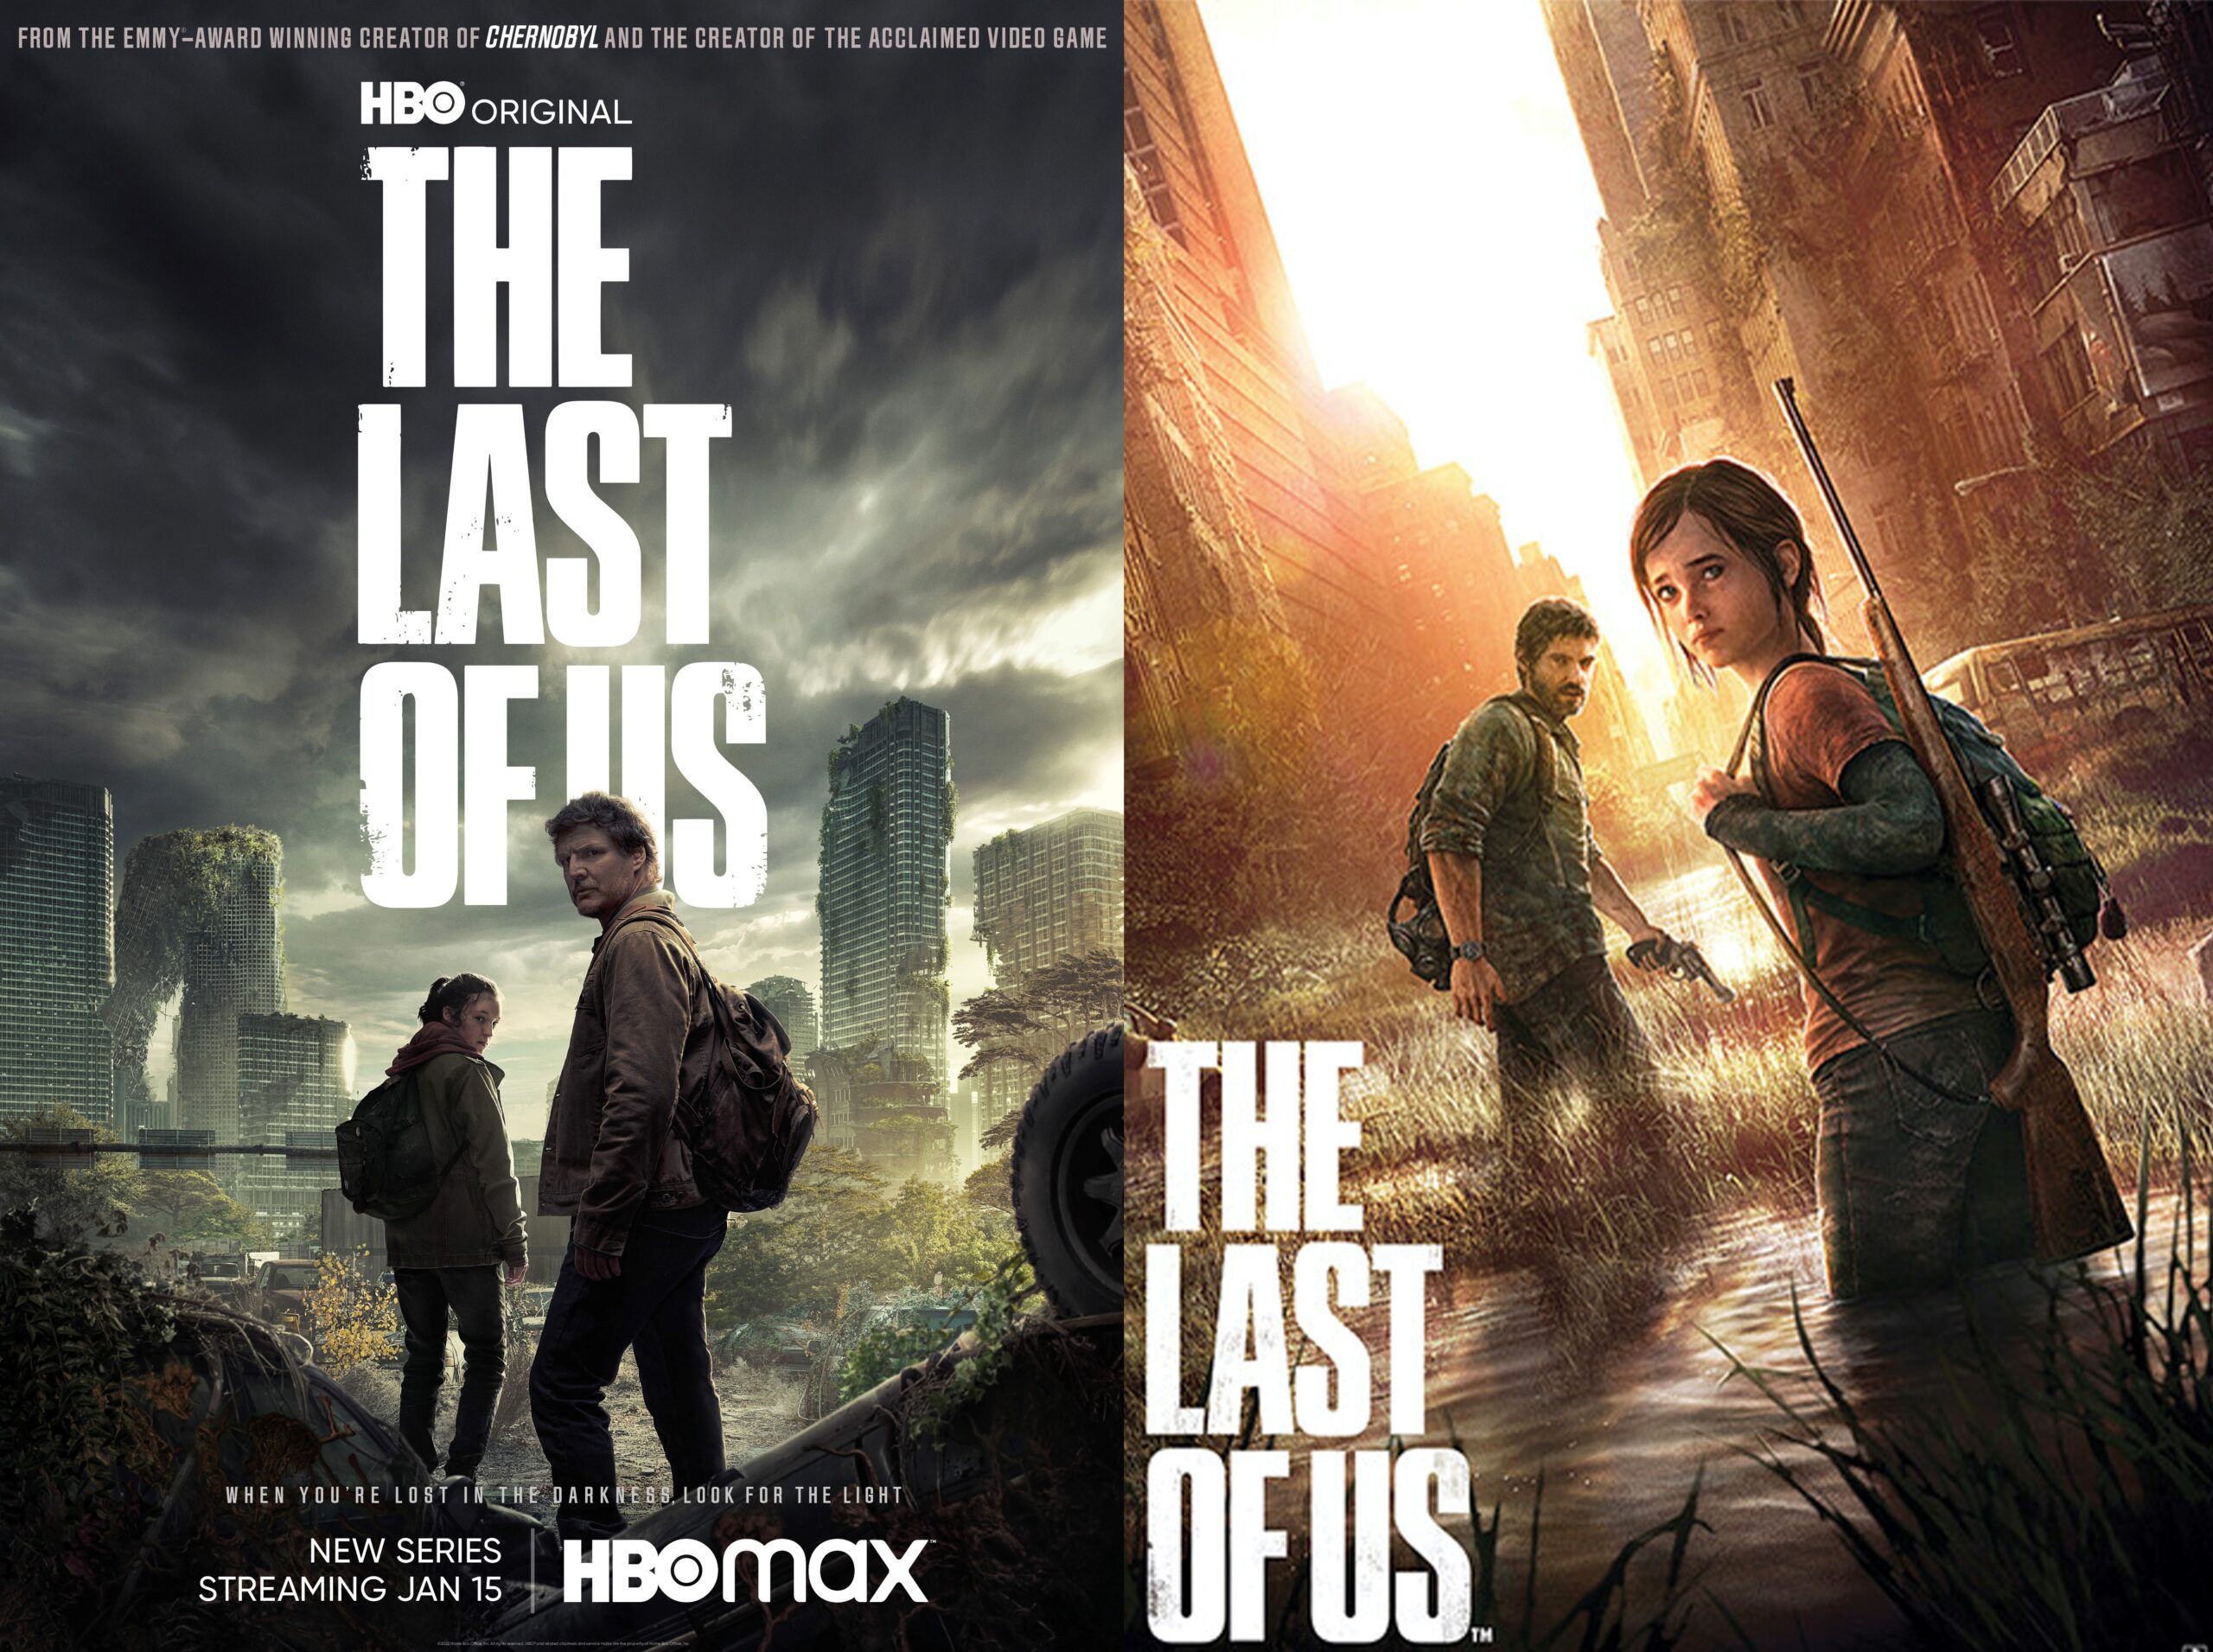 Comparing 'The Last Of Us' Series to Its Original Video Game: How It Fares